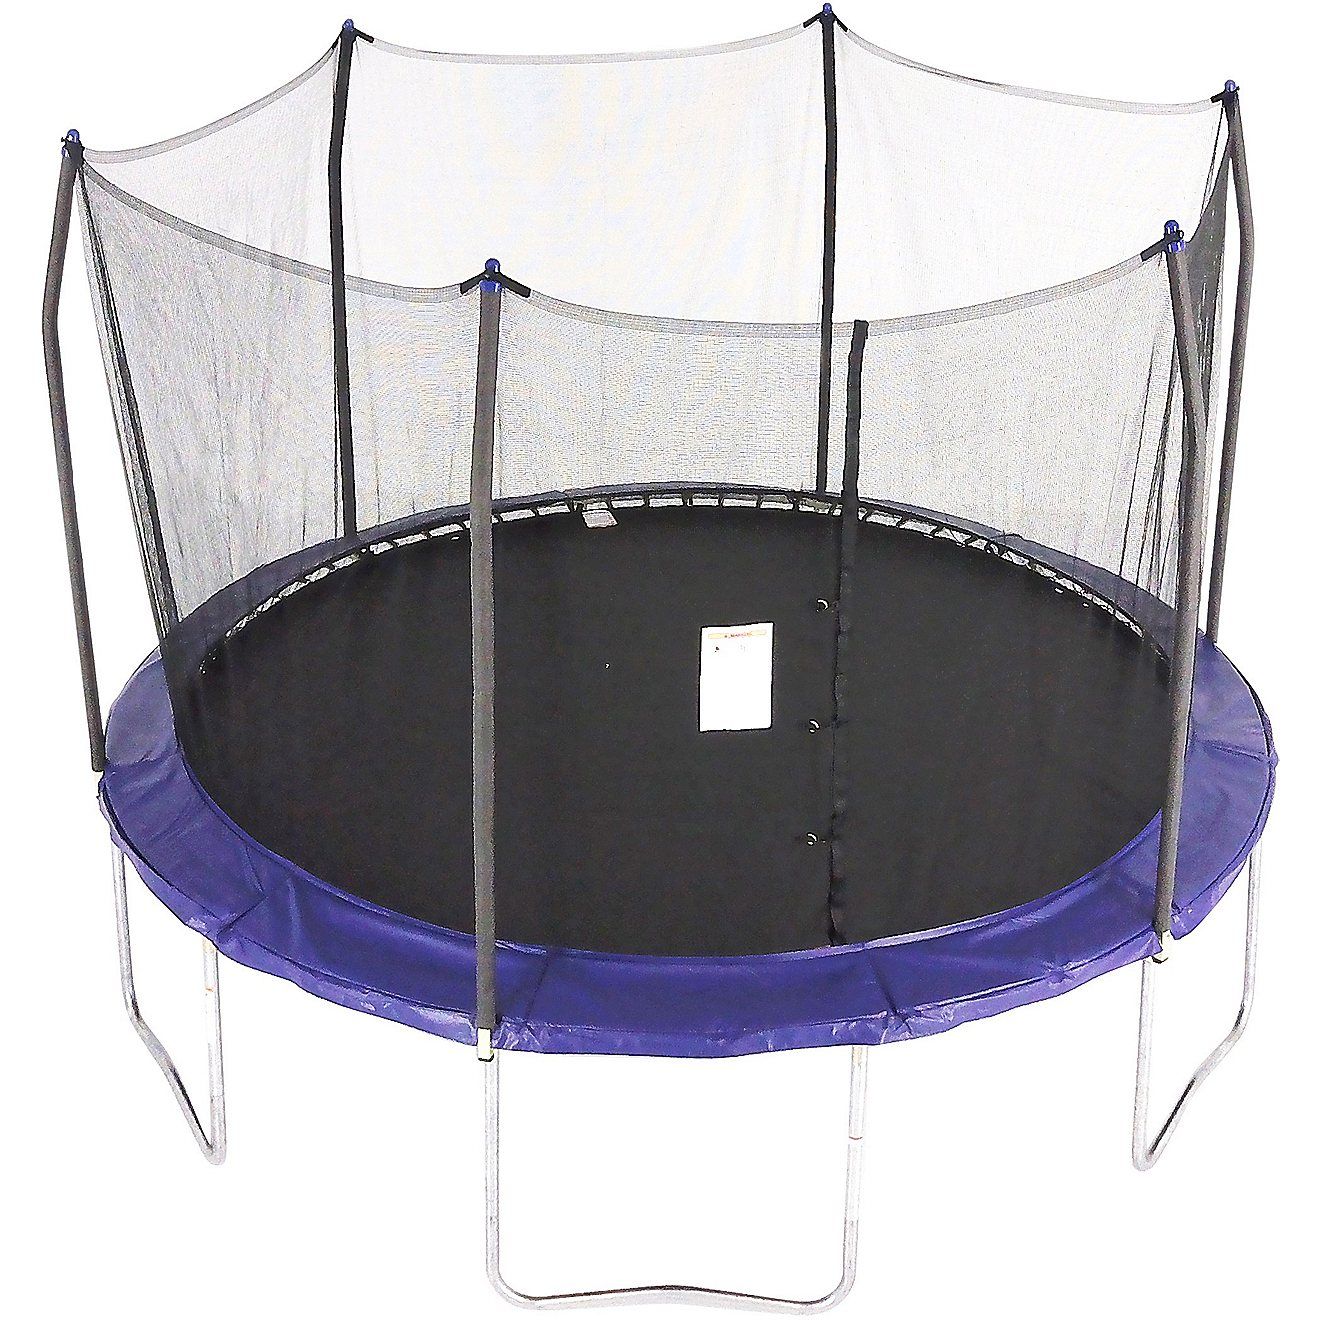 Skywalker Trampolines 12' Round Trampoline with Enclosure | Academy Sports + Outdoor Affiliate